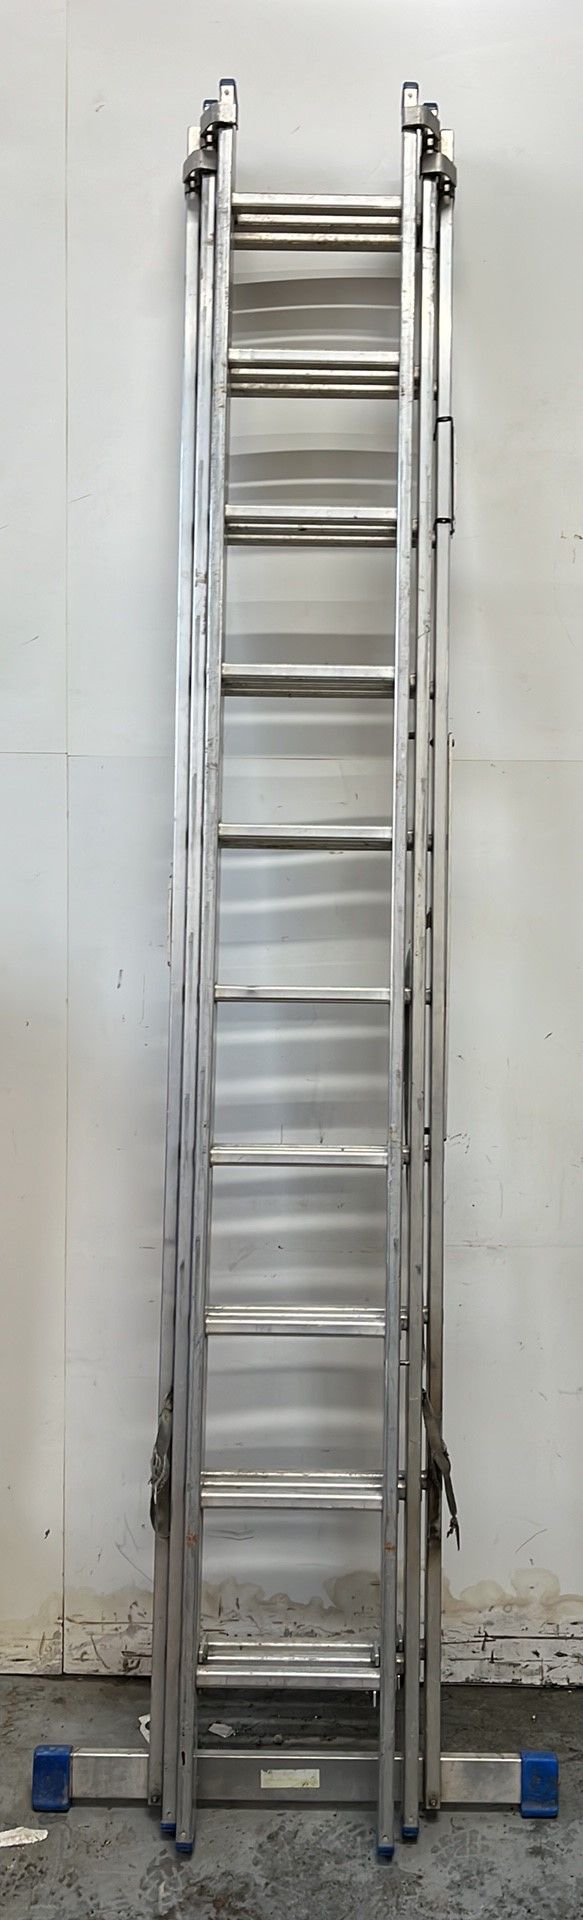 Zarges 3 Section Ladder